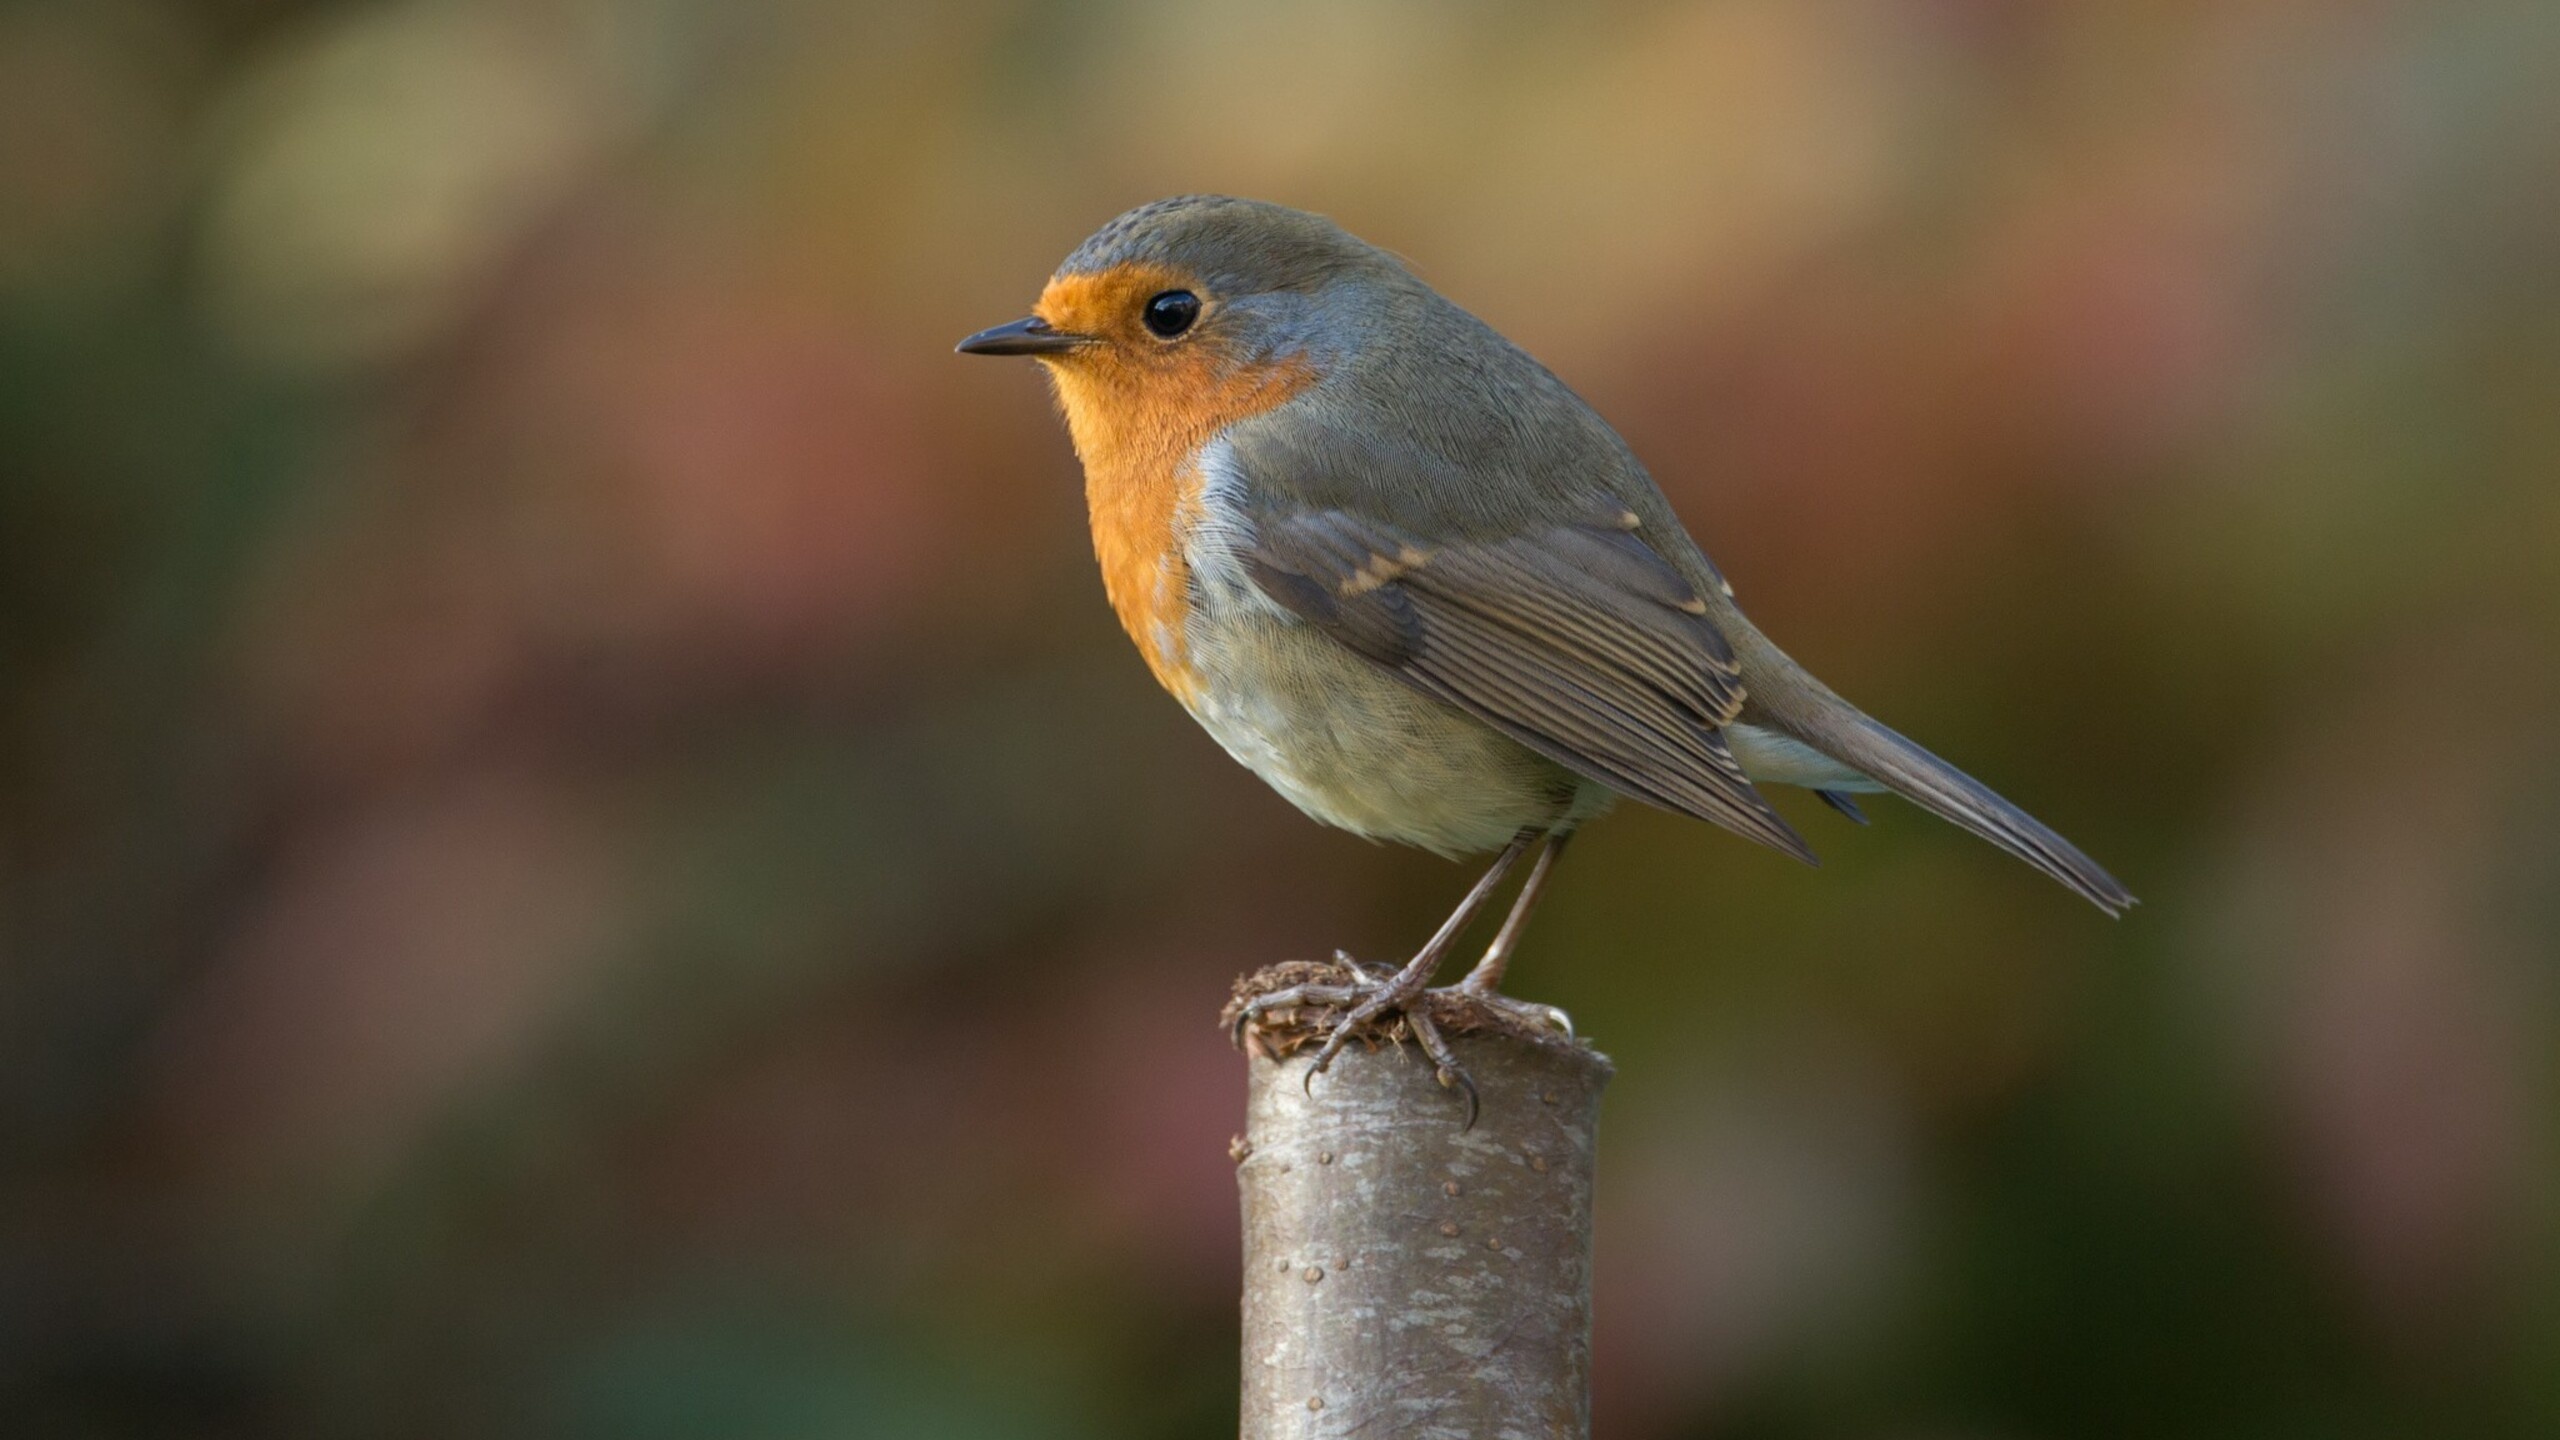 Robin bird photography, High-definition wallpapers, Stunning resolution, Picture-perfect, 2560x1440 HD Desktop